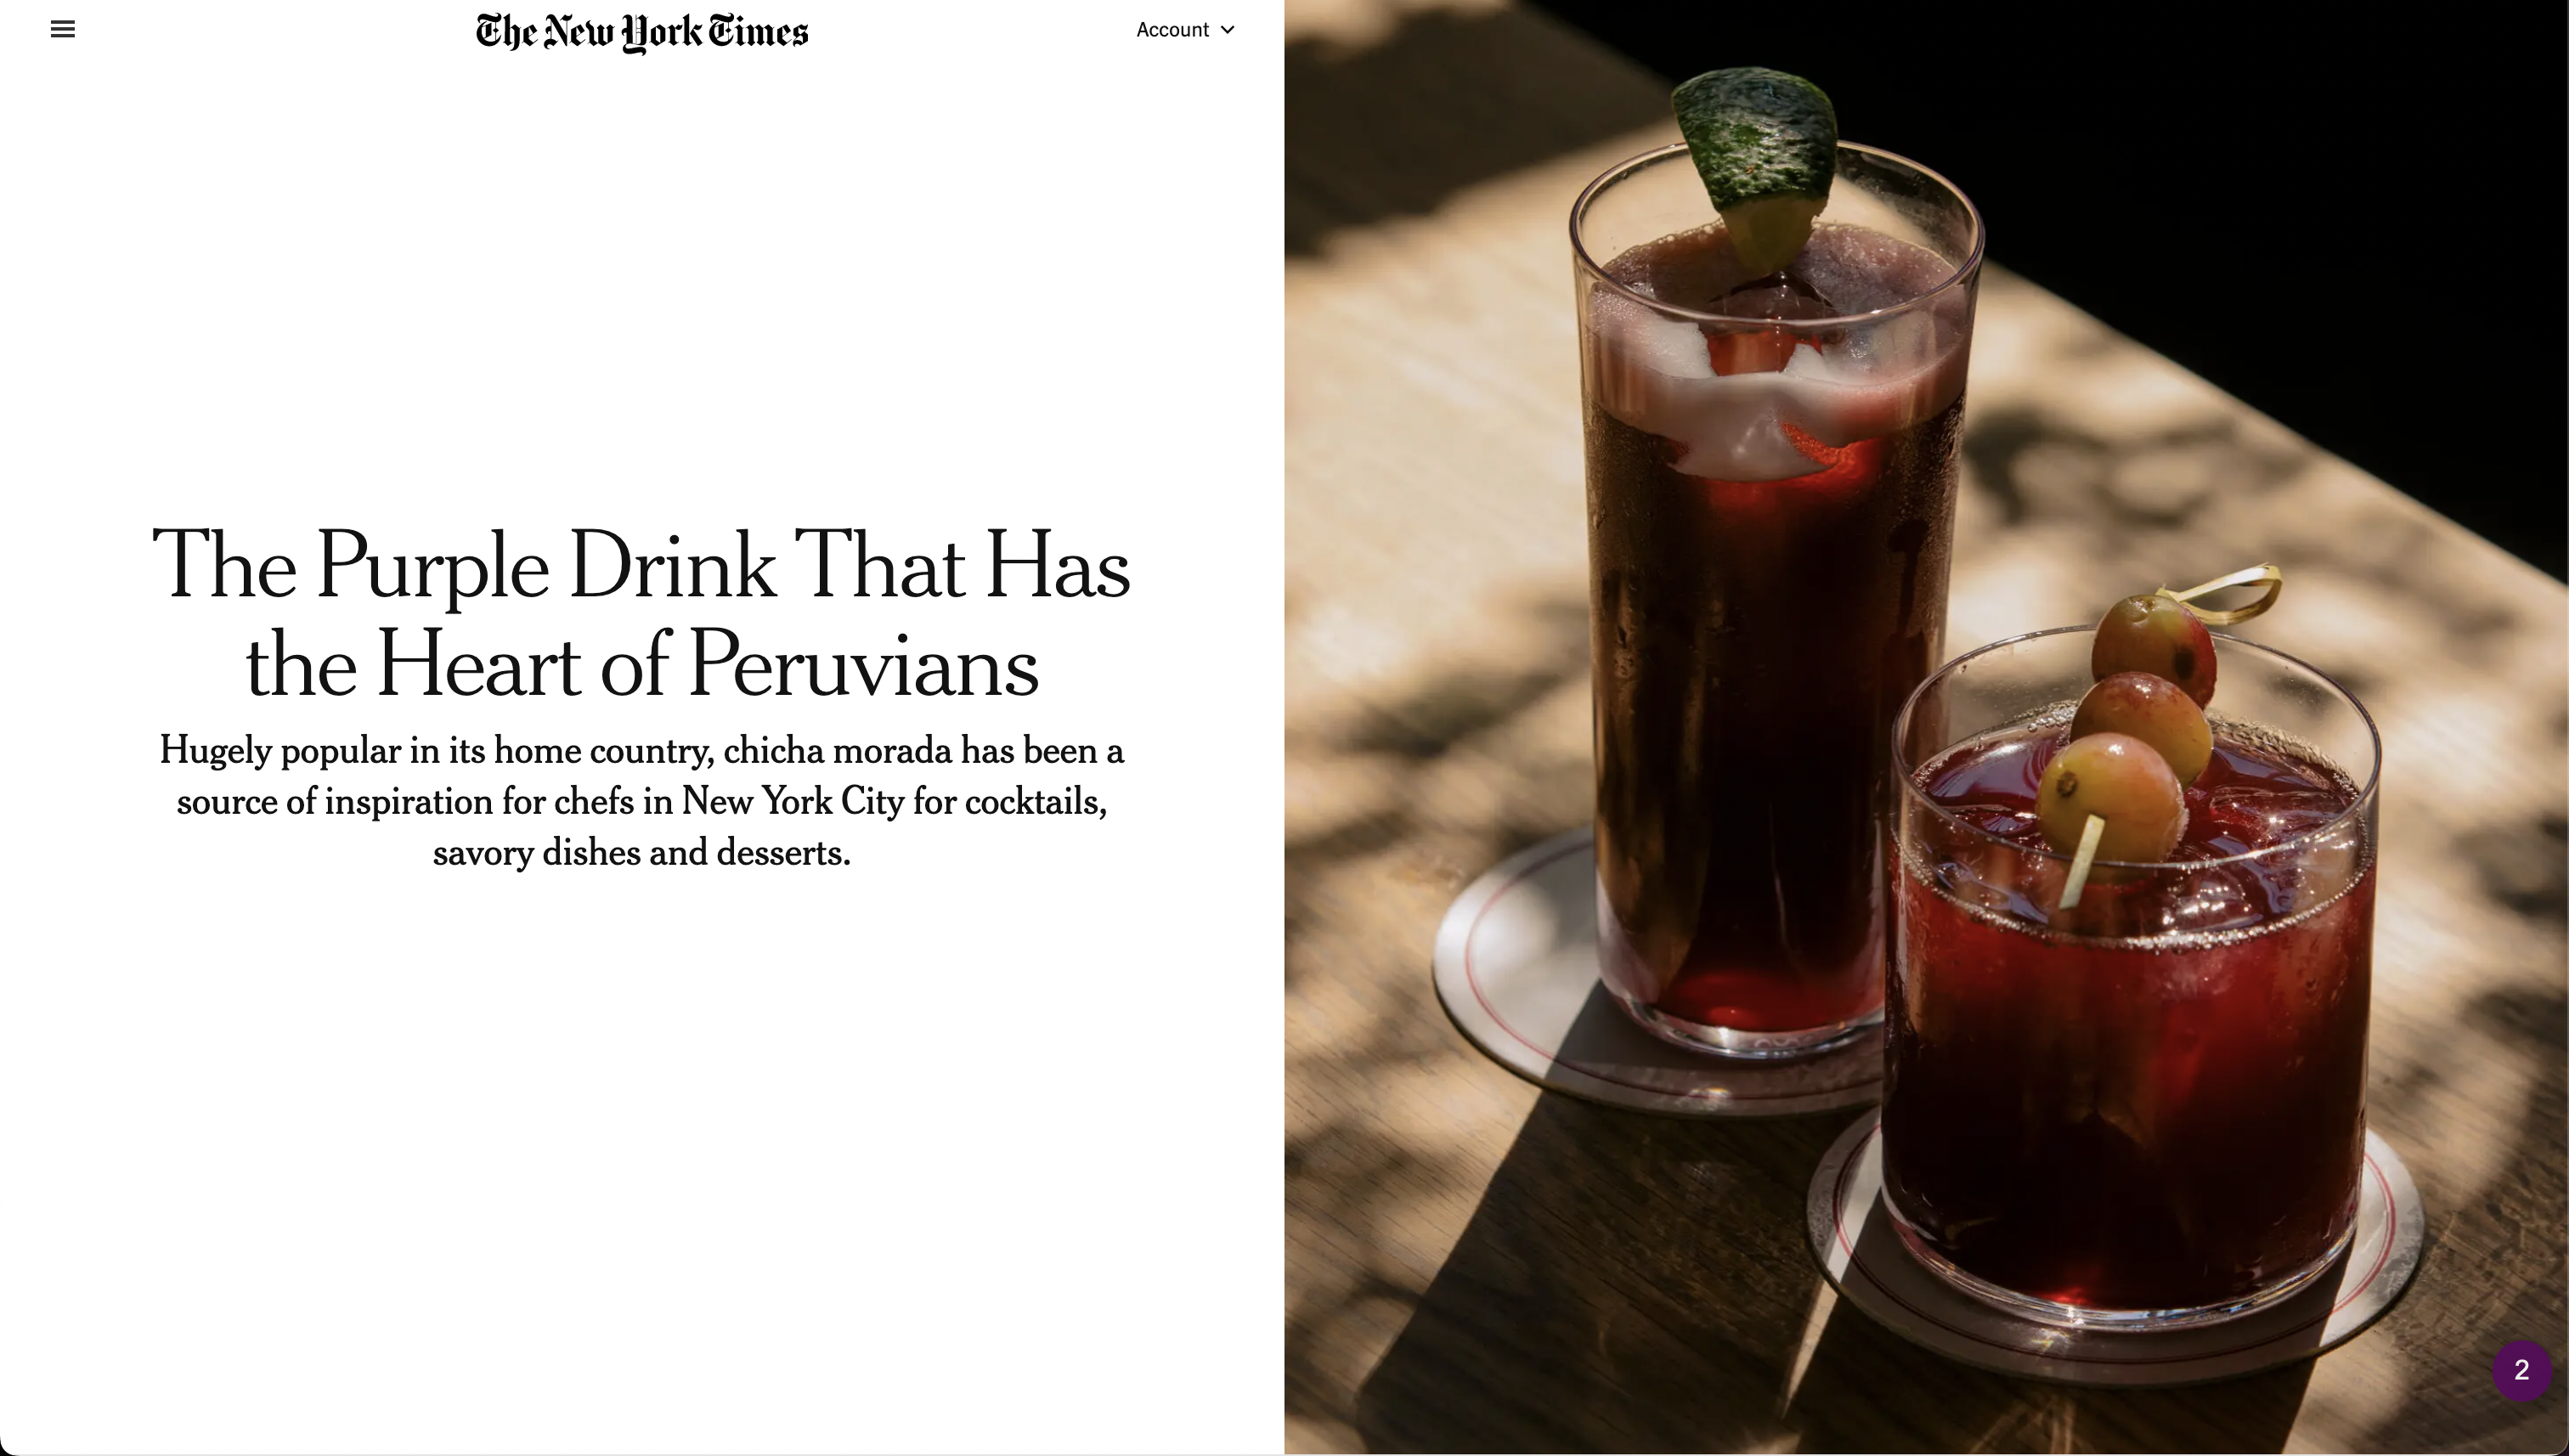 Thumbnail of for The New York Times: The Purple Drink That Has the Heart of Peruvians